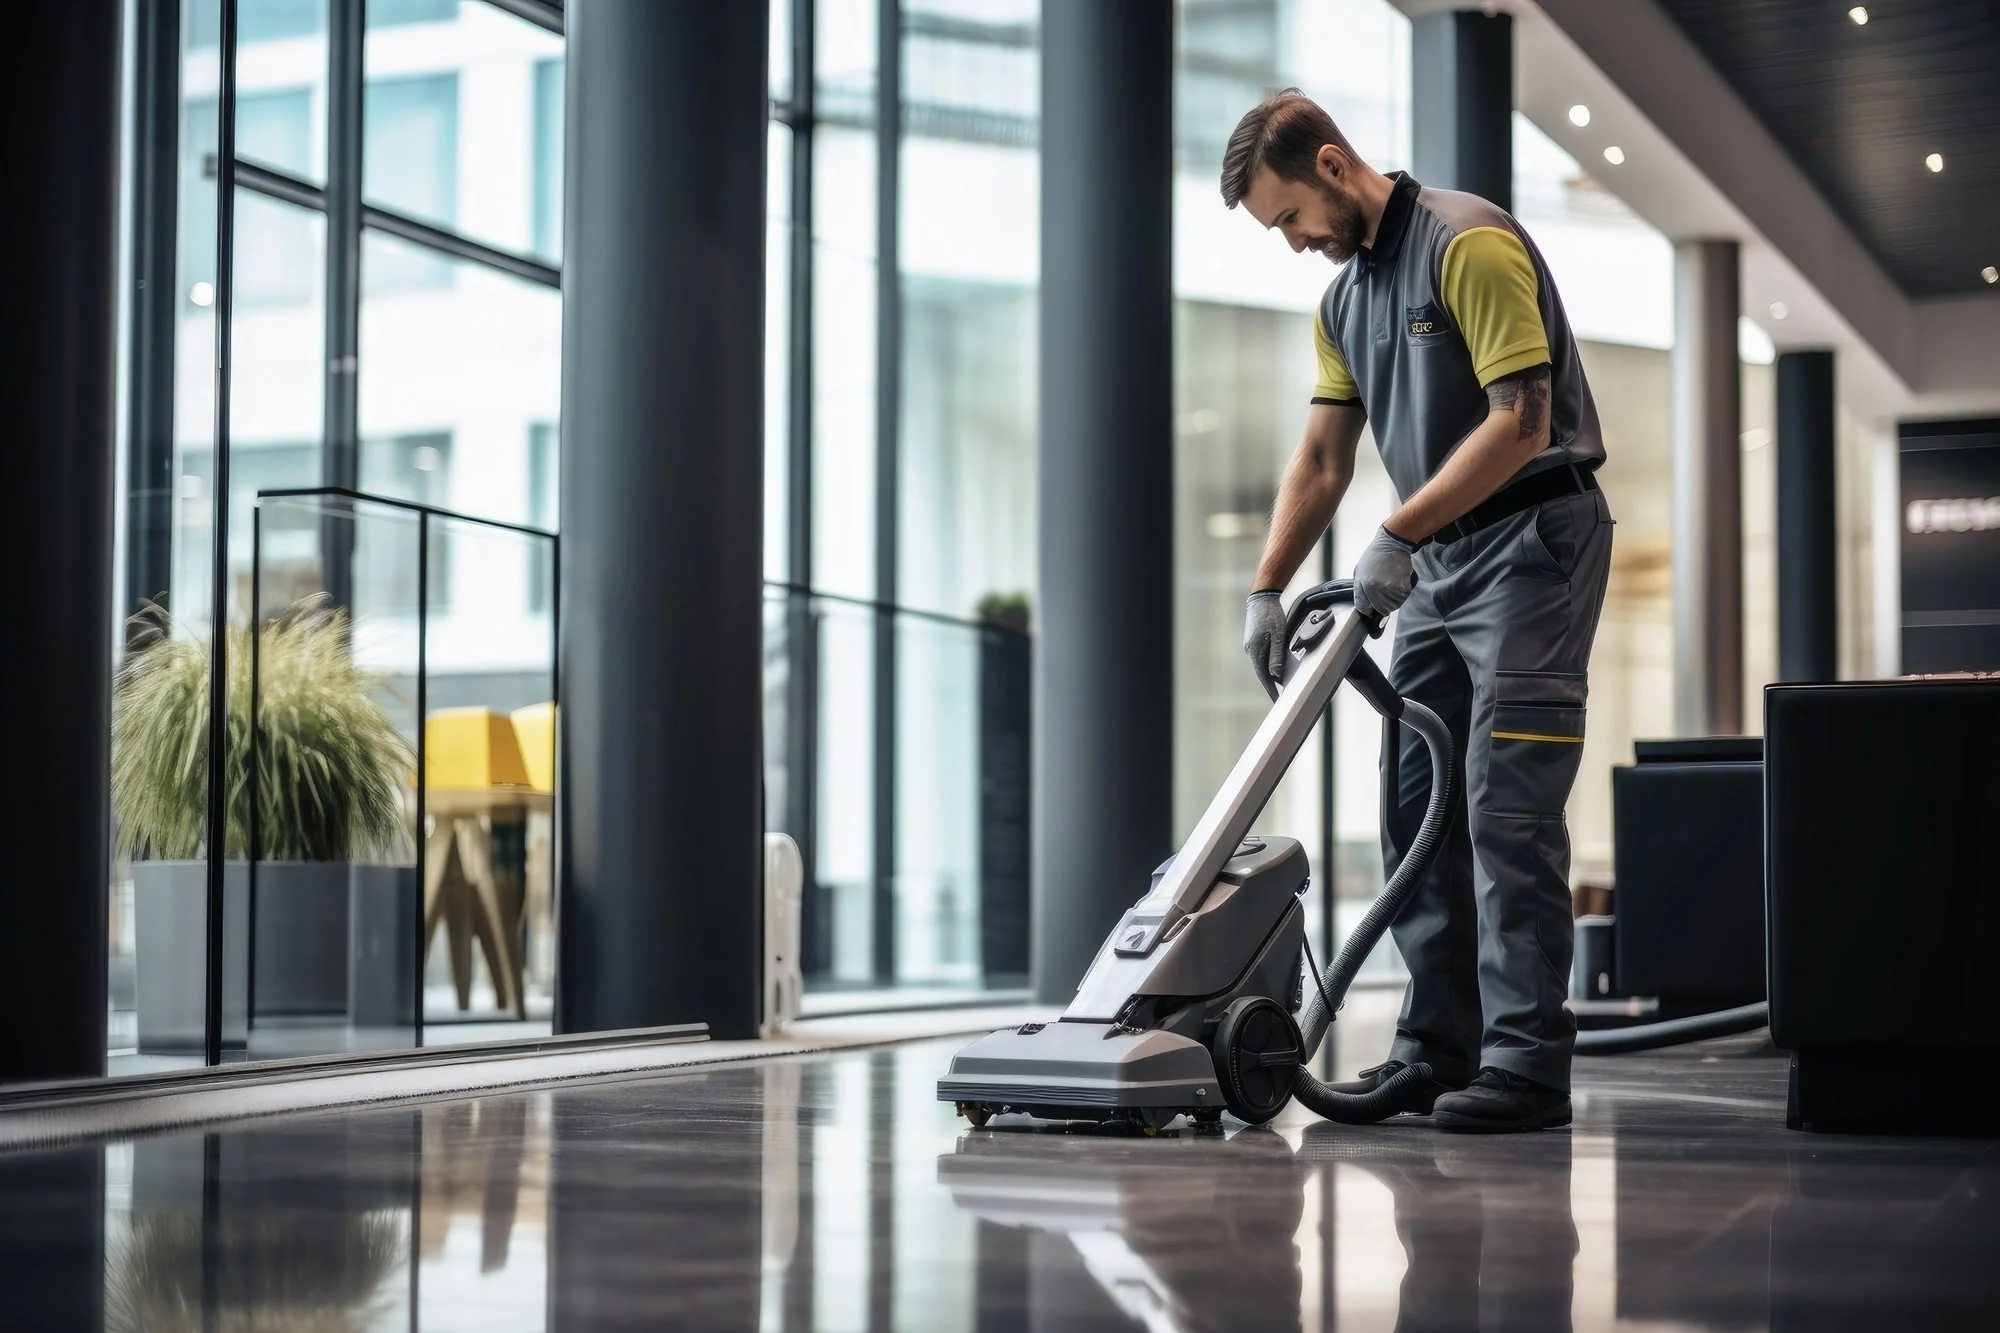 Quality Commercial Cleaning Services in Shelley, ID